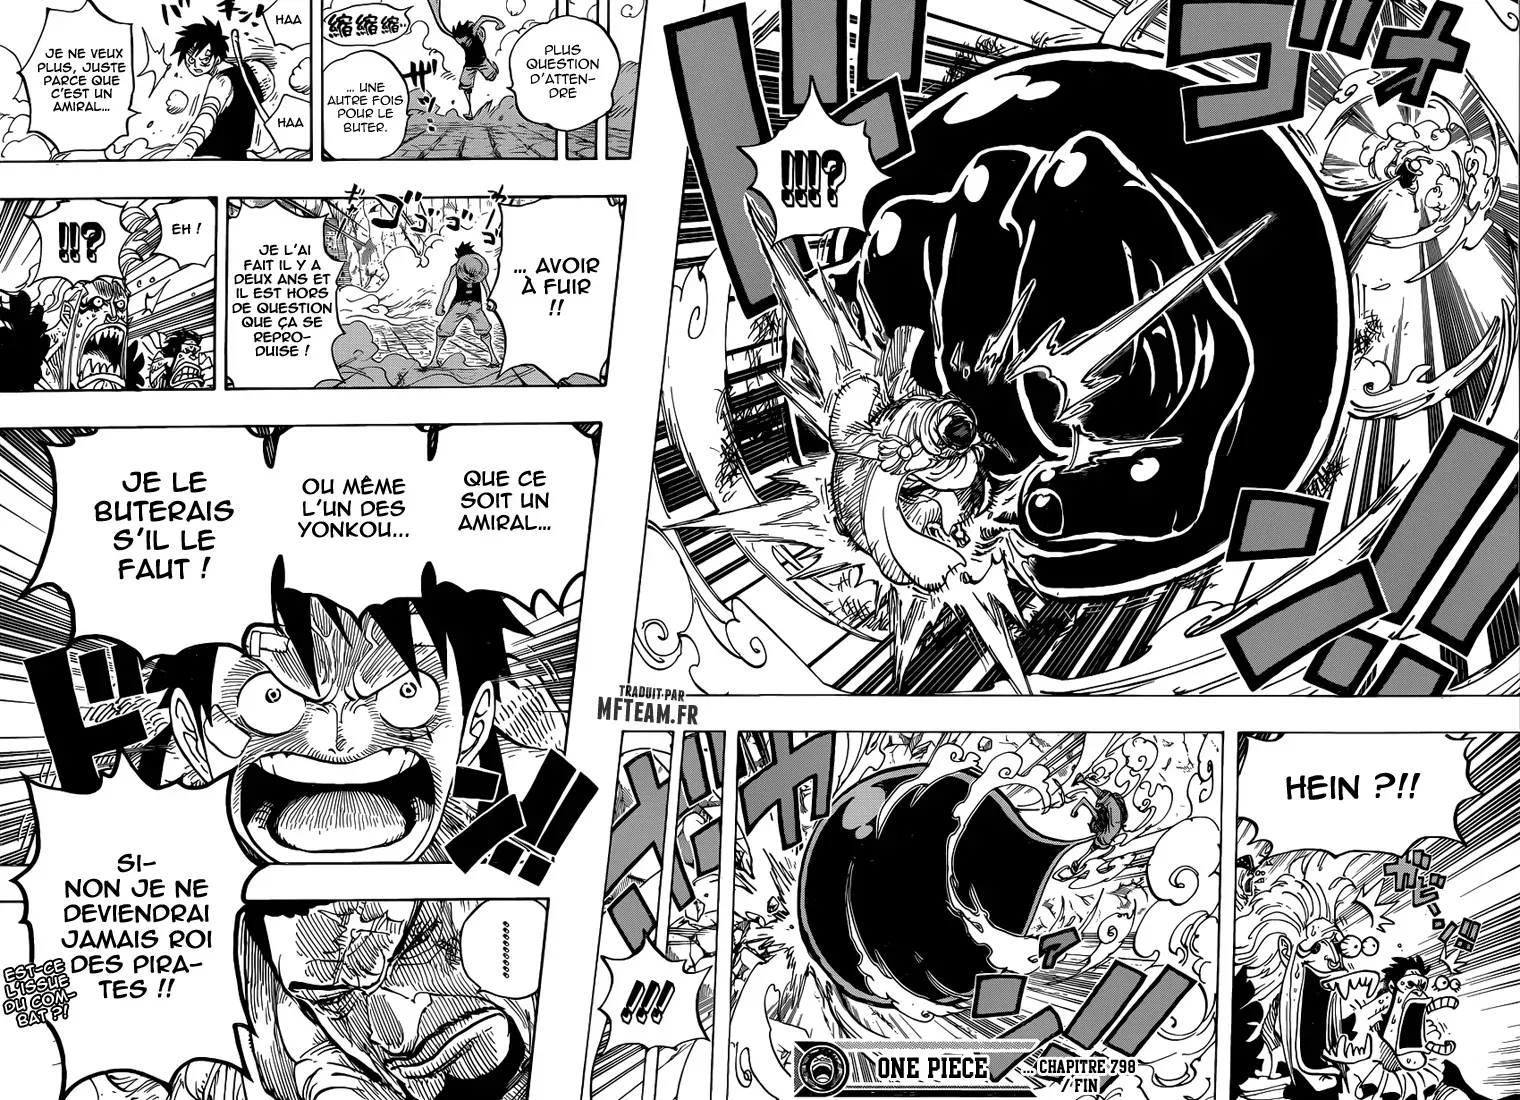 One Piece: Chapter chapitre-798 - Page 15